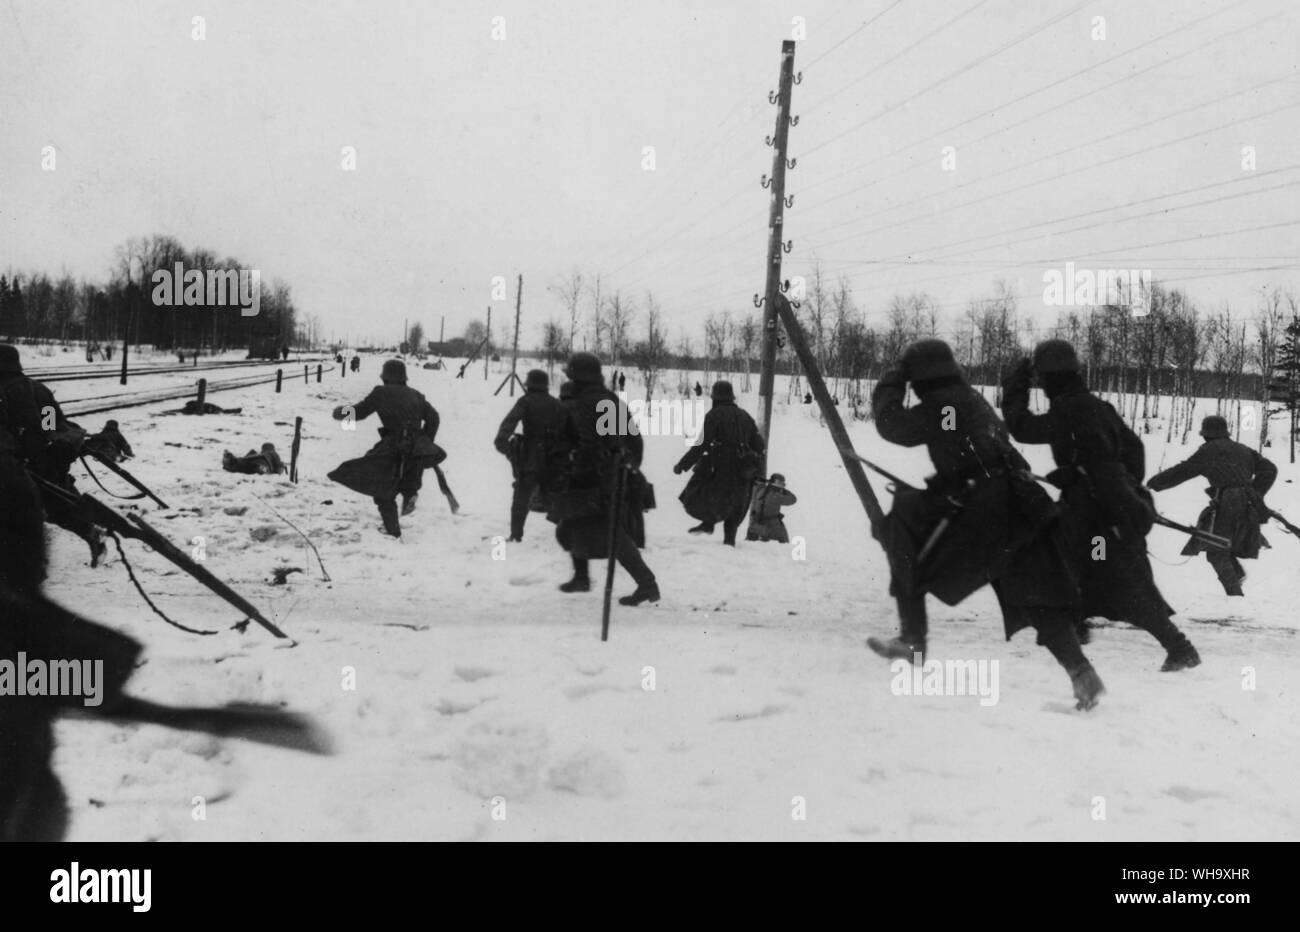 WW1: Germans attacking Bolsheviks.. Jager in action pursuing bands of Bolsheviks in the Ukraine. 1917 . German official photographer Stock Photo